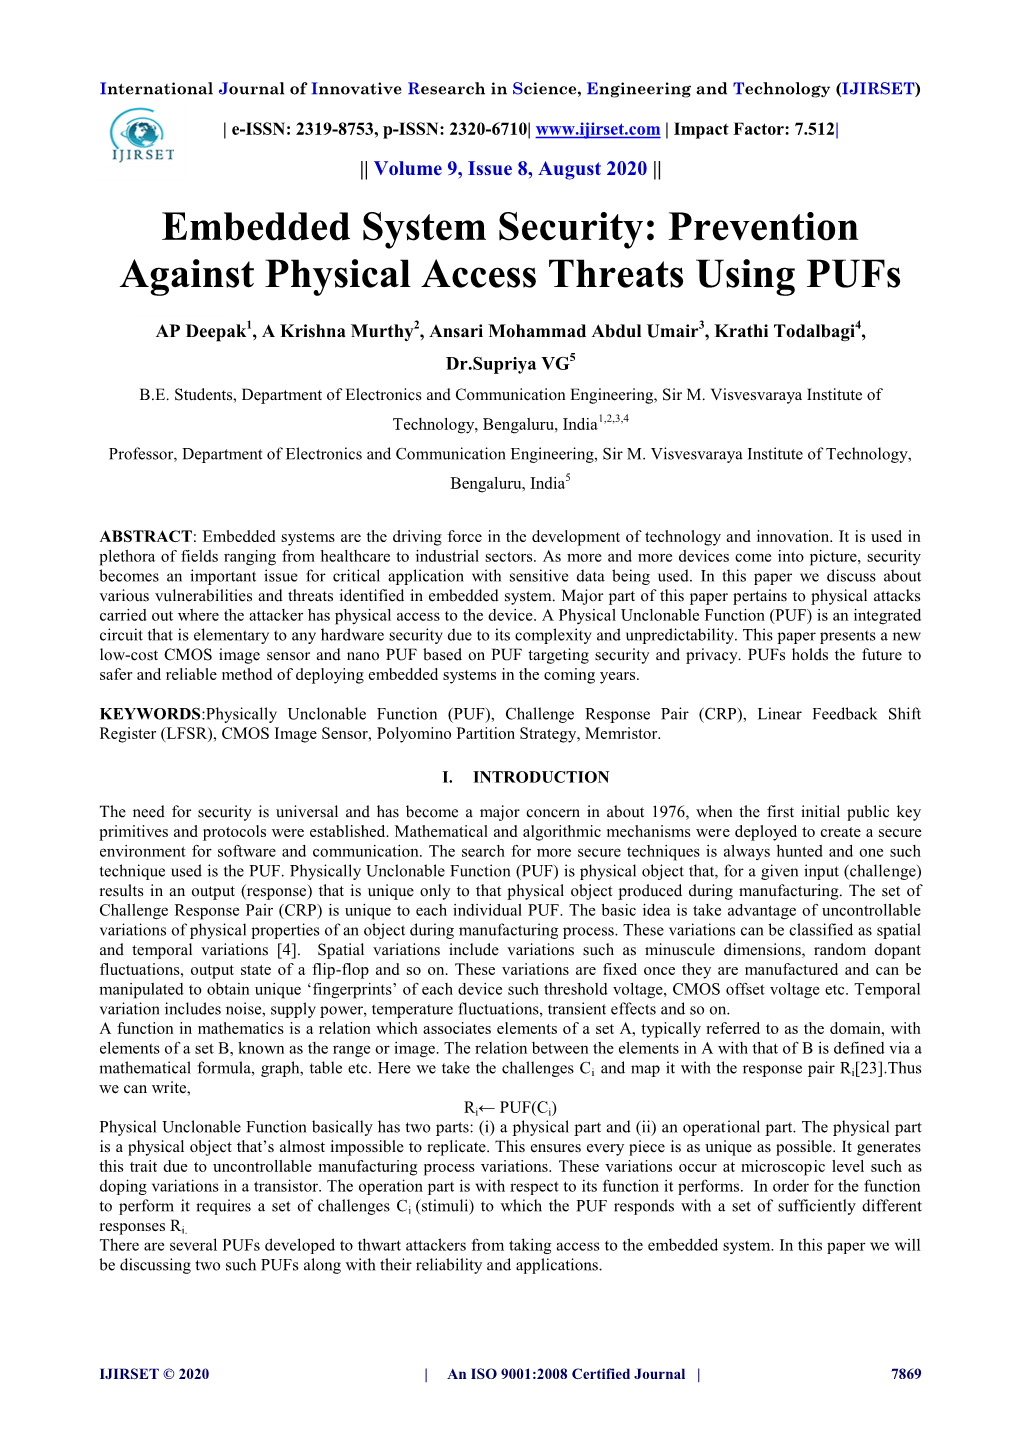 Embedded System Security: Prevention Against Physical Access Threats Using Pufs